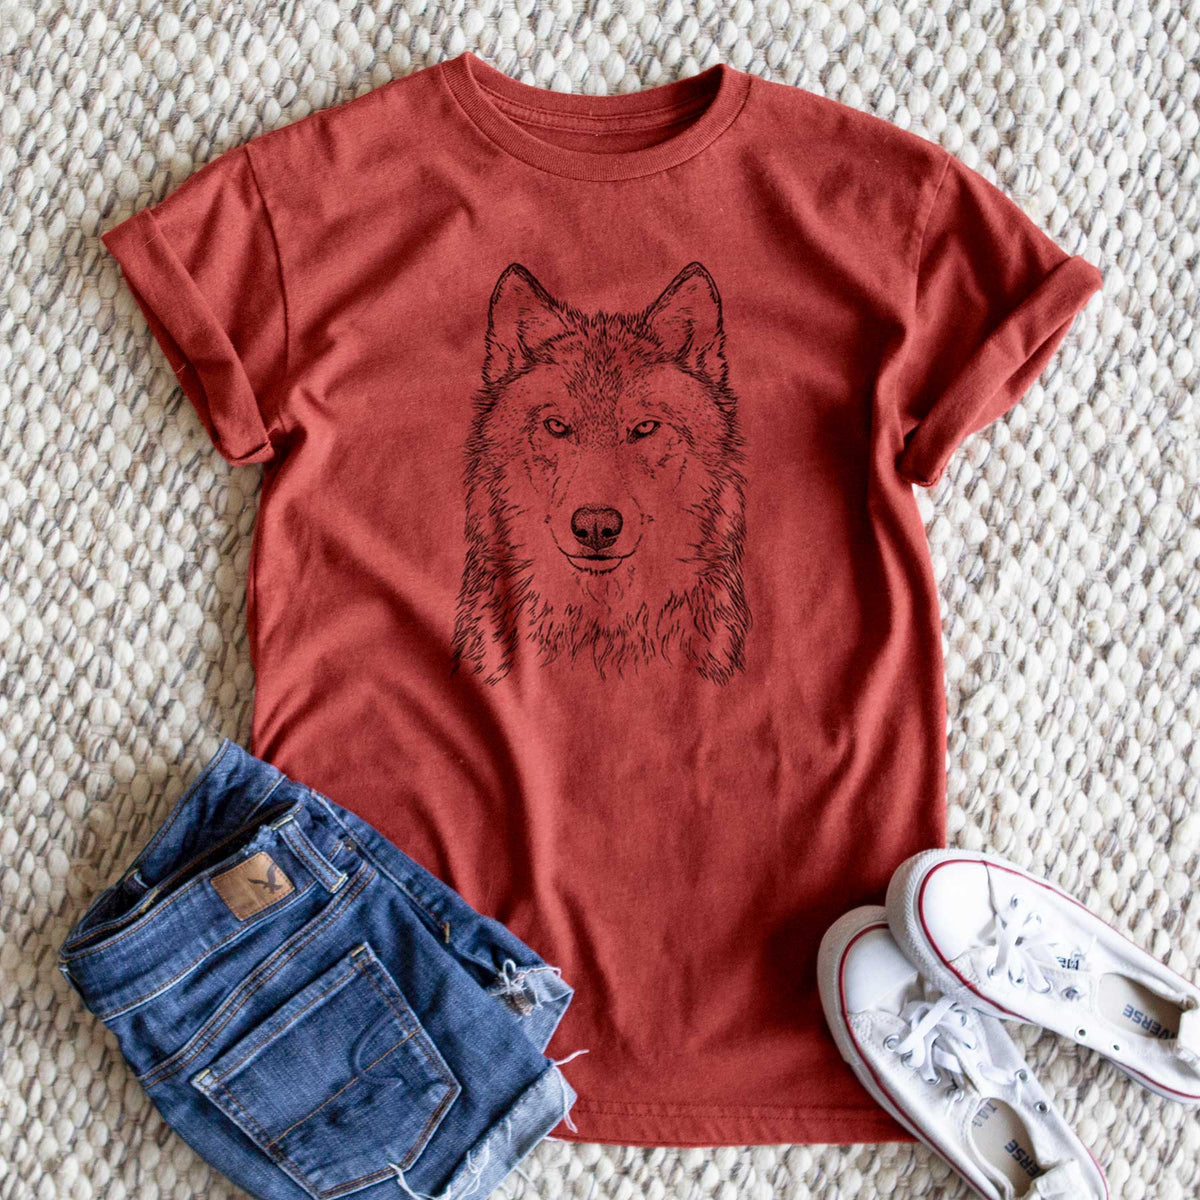 Grey Wolf - Canis lupus - Unisex Recycled Eco Tee  - CLOSEOUT - FINAL SALE